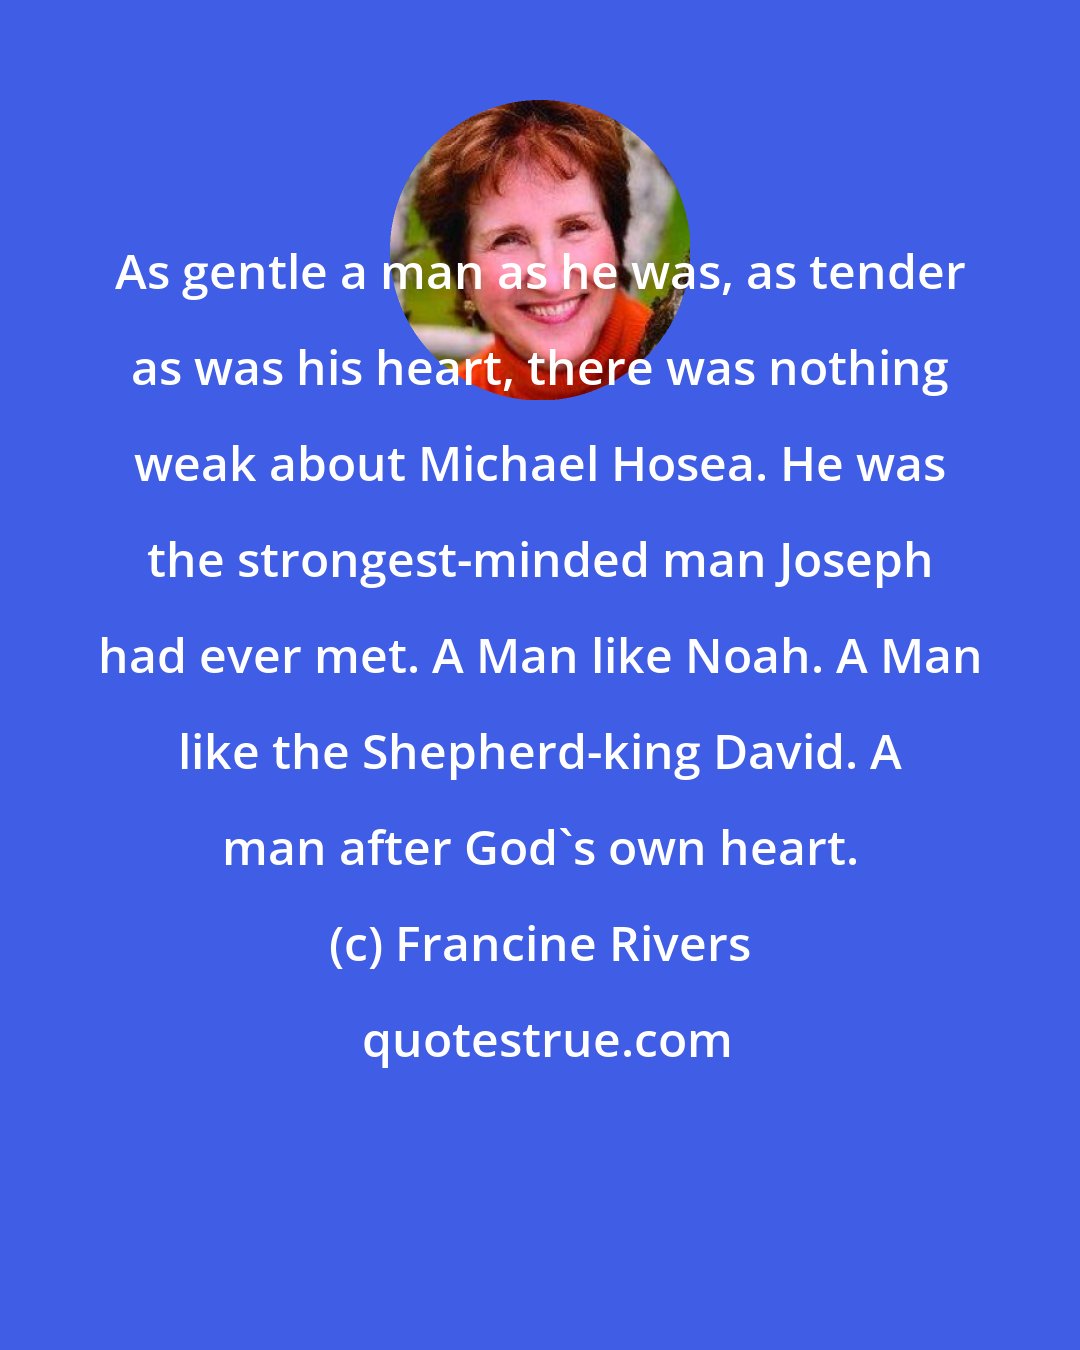 Francine Rivers: As gentle a man as he was, as tender as was his heart, there was nothing weak about Michael Hosea. He was the strongest-minded man Joseph had ever met. A Man like Noah. A Man like the Shepherd-king David. A man after God's own heart.